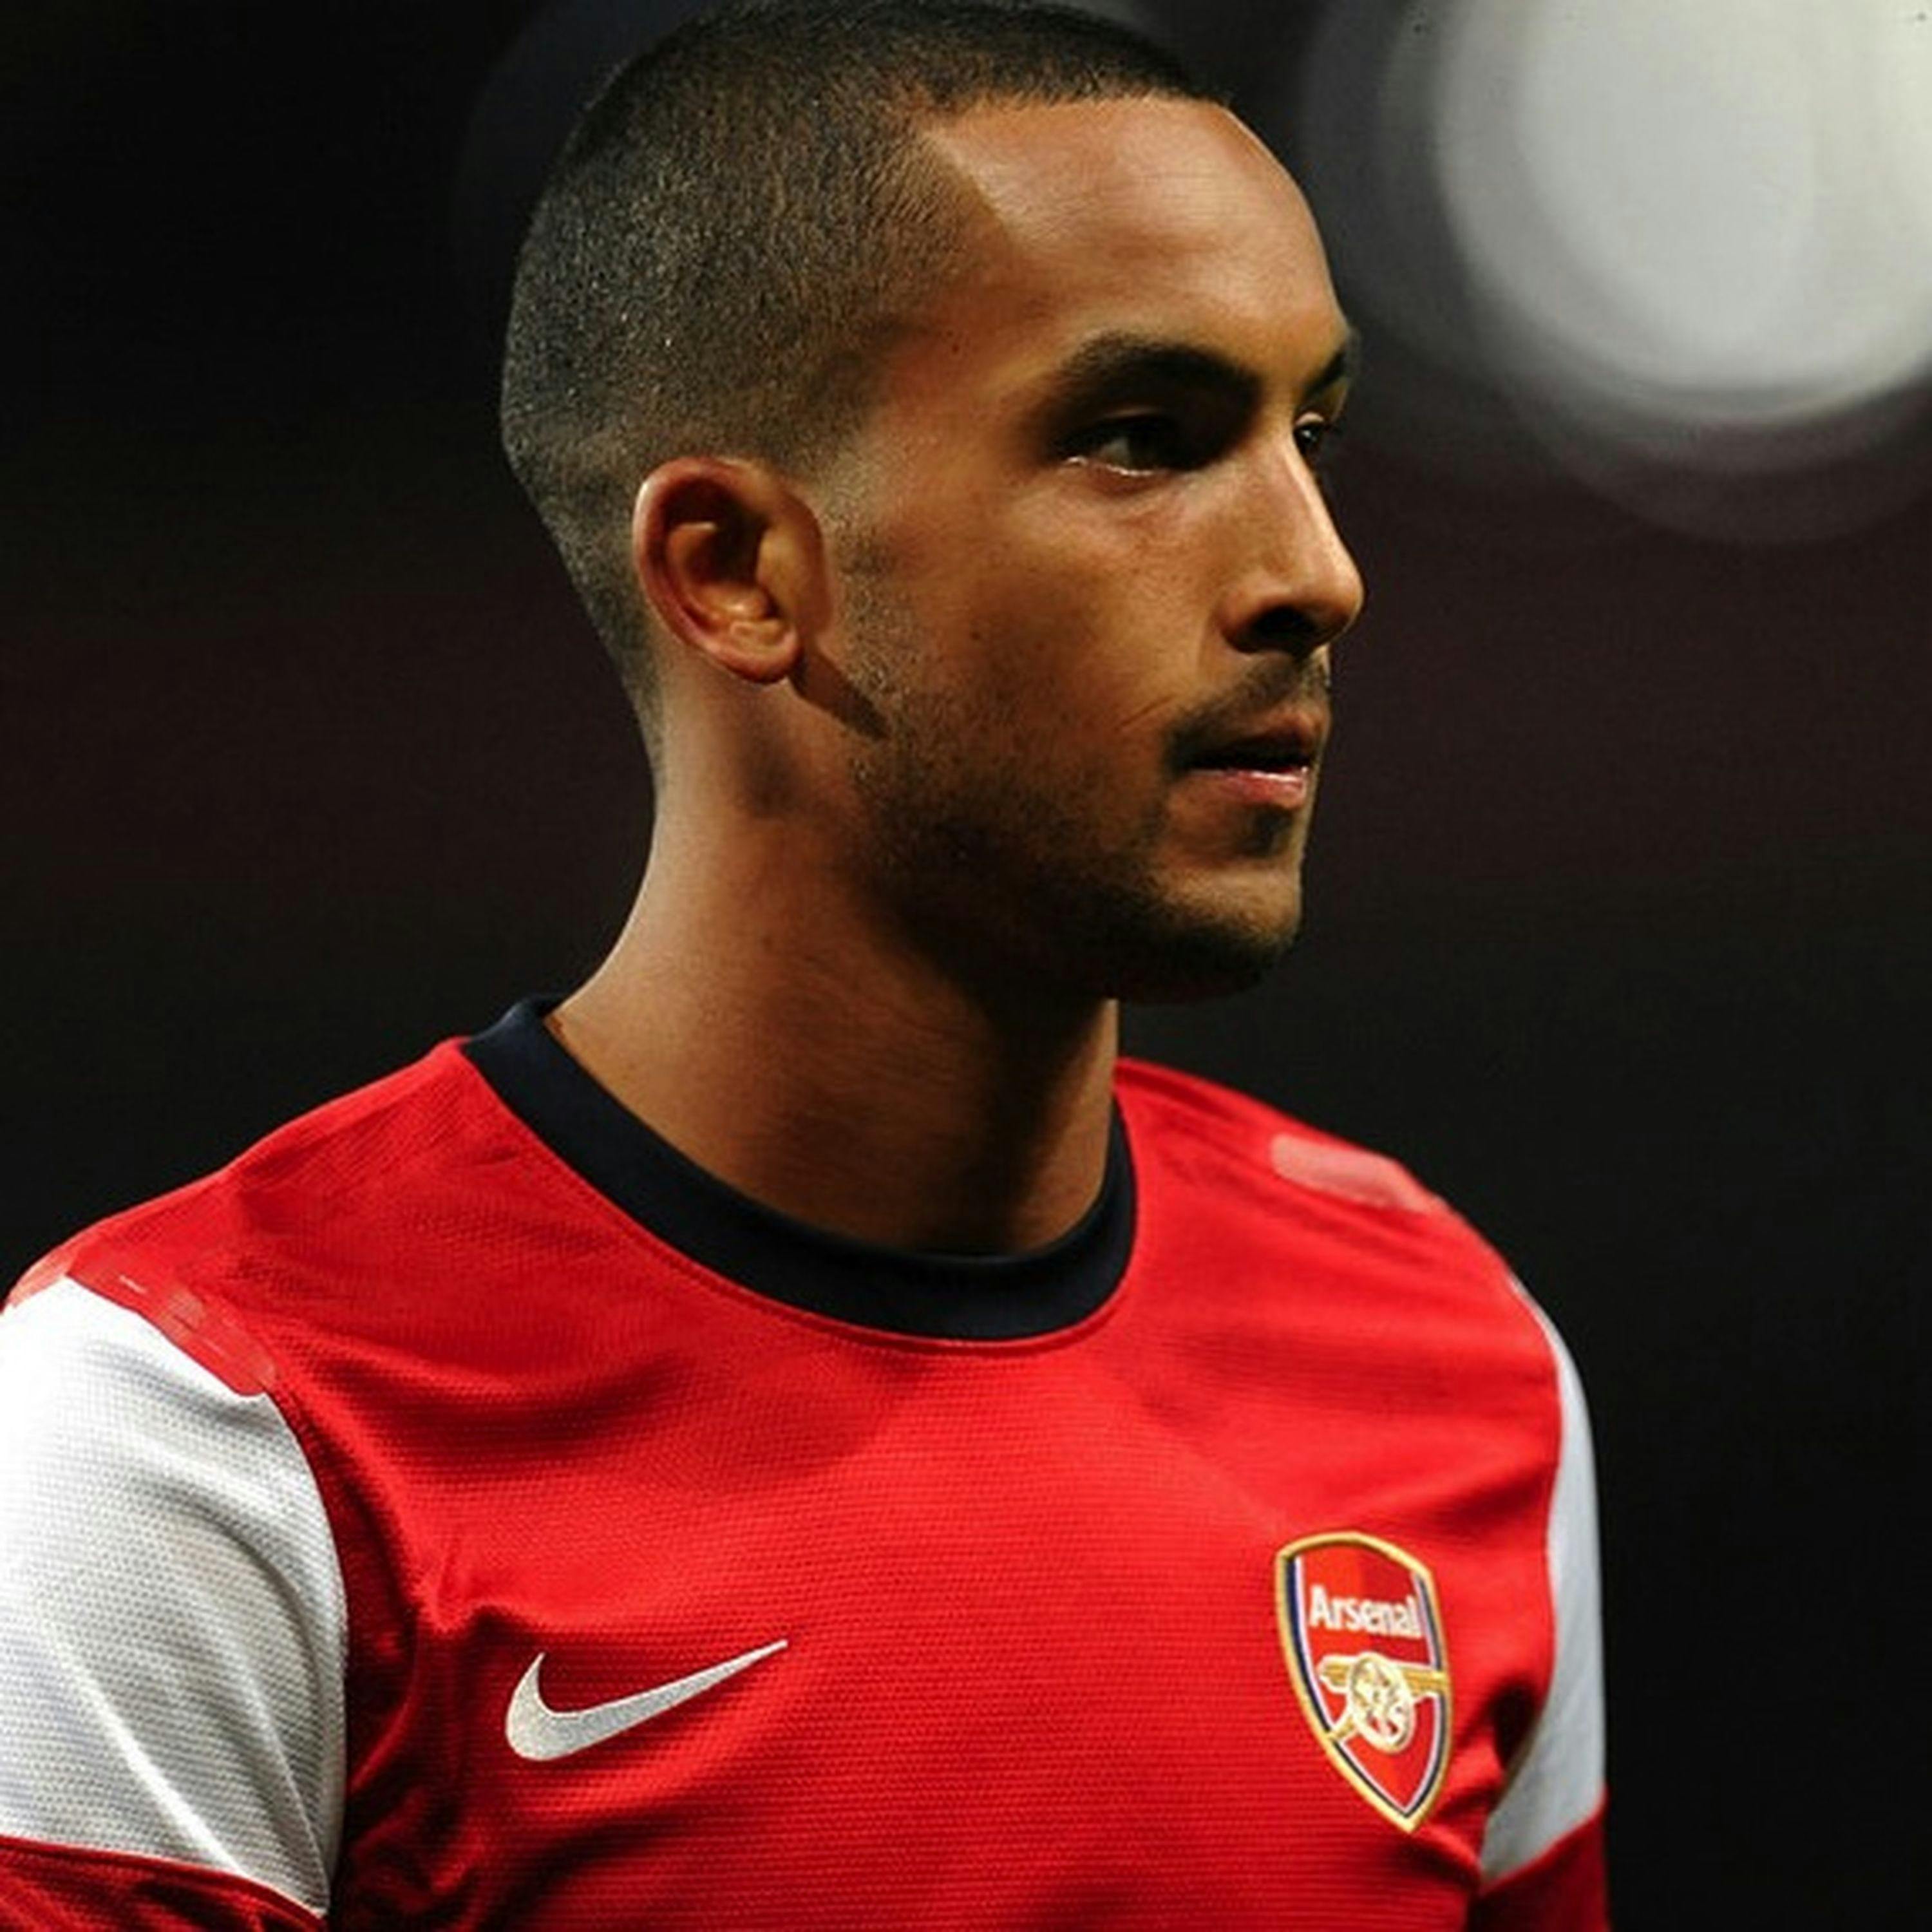 How Old is Theo Walcott?